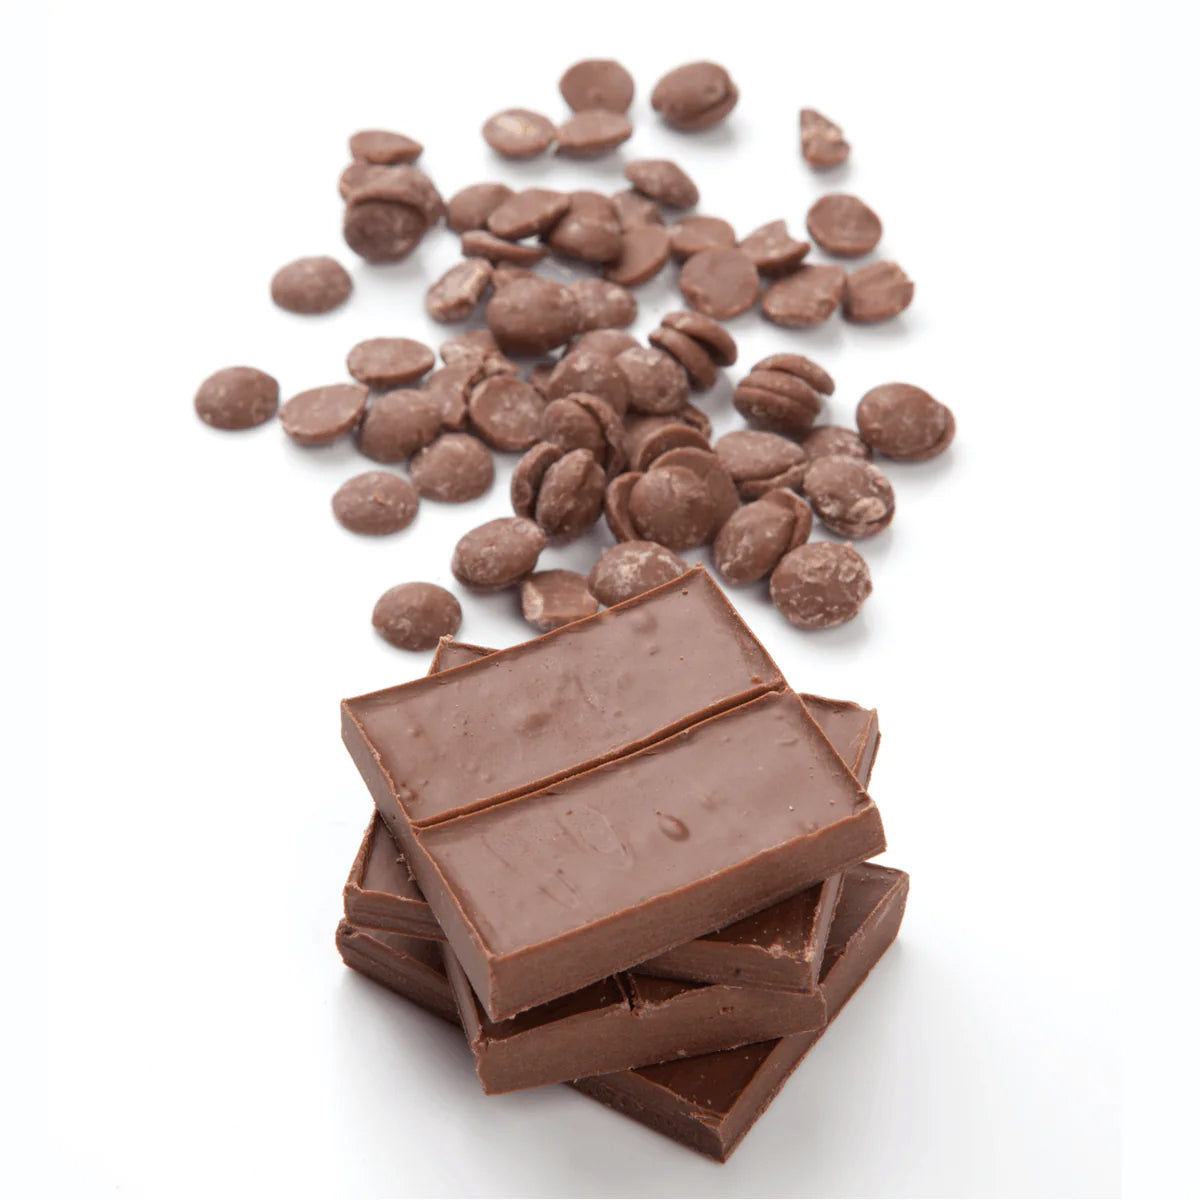 Milk chocolate also has health benefits according to the University of Aberdeen